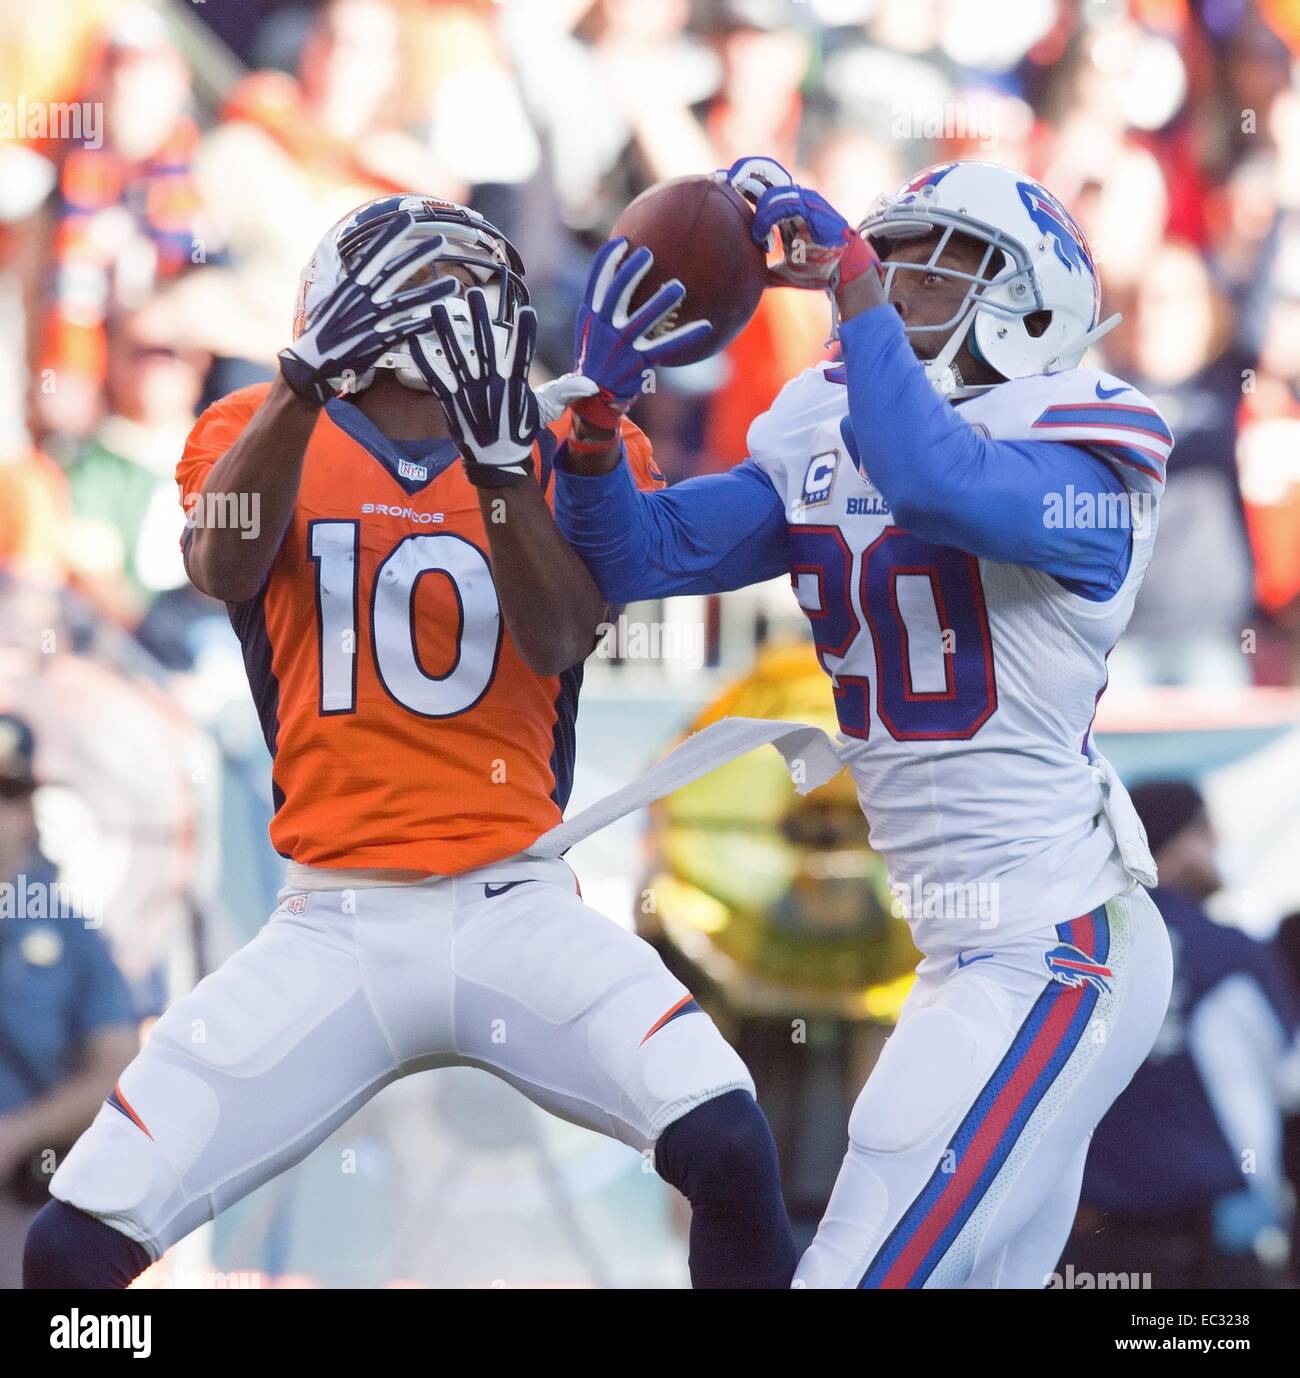 Denver, Colorado, USA. 7th Dec, 2014. Broncos WR EMMANUEL SANDERS, left, battles with Bills CB COREY GRAHAM, right, after the ball is intercepted during the 1st. Half at Sports Authority Field at Mile High Sunday afternoon. The Broncos beat the Bills 24-17. © Hector Acevedo/ZUMA Wire/Alamy Live News Stock Photo